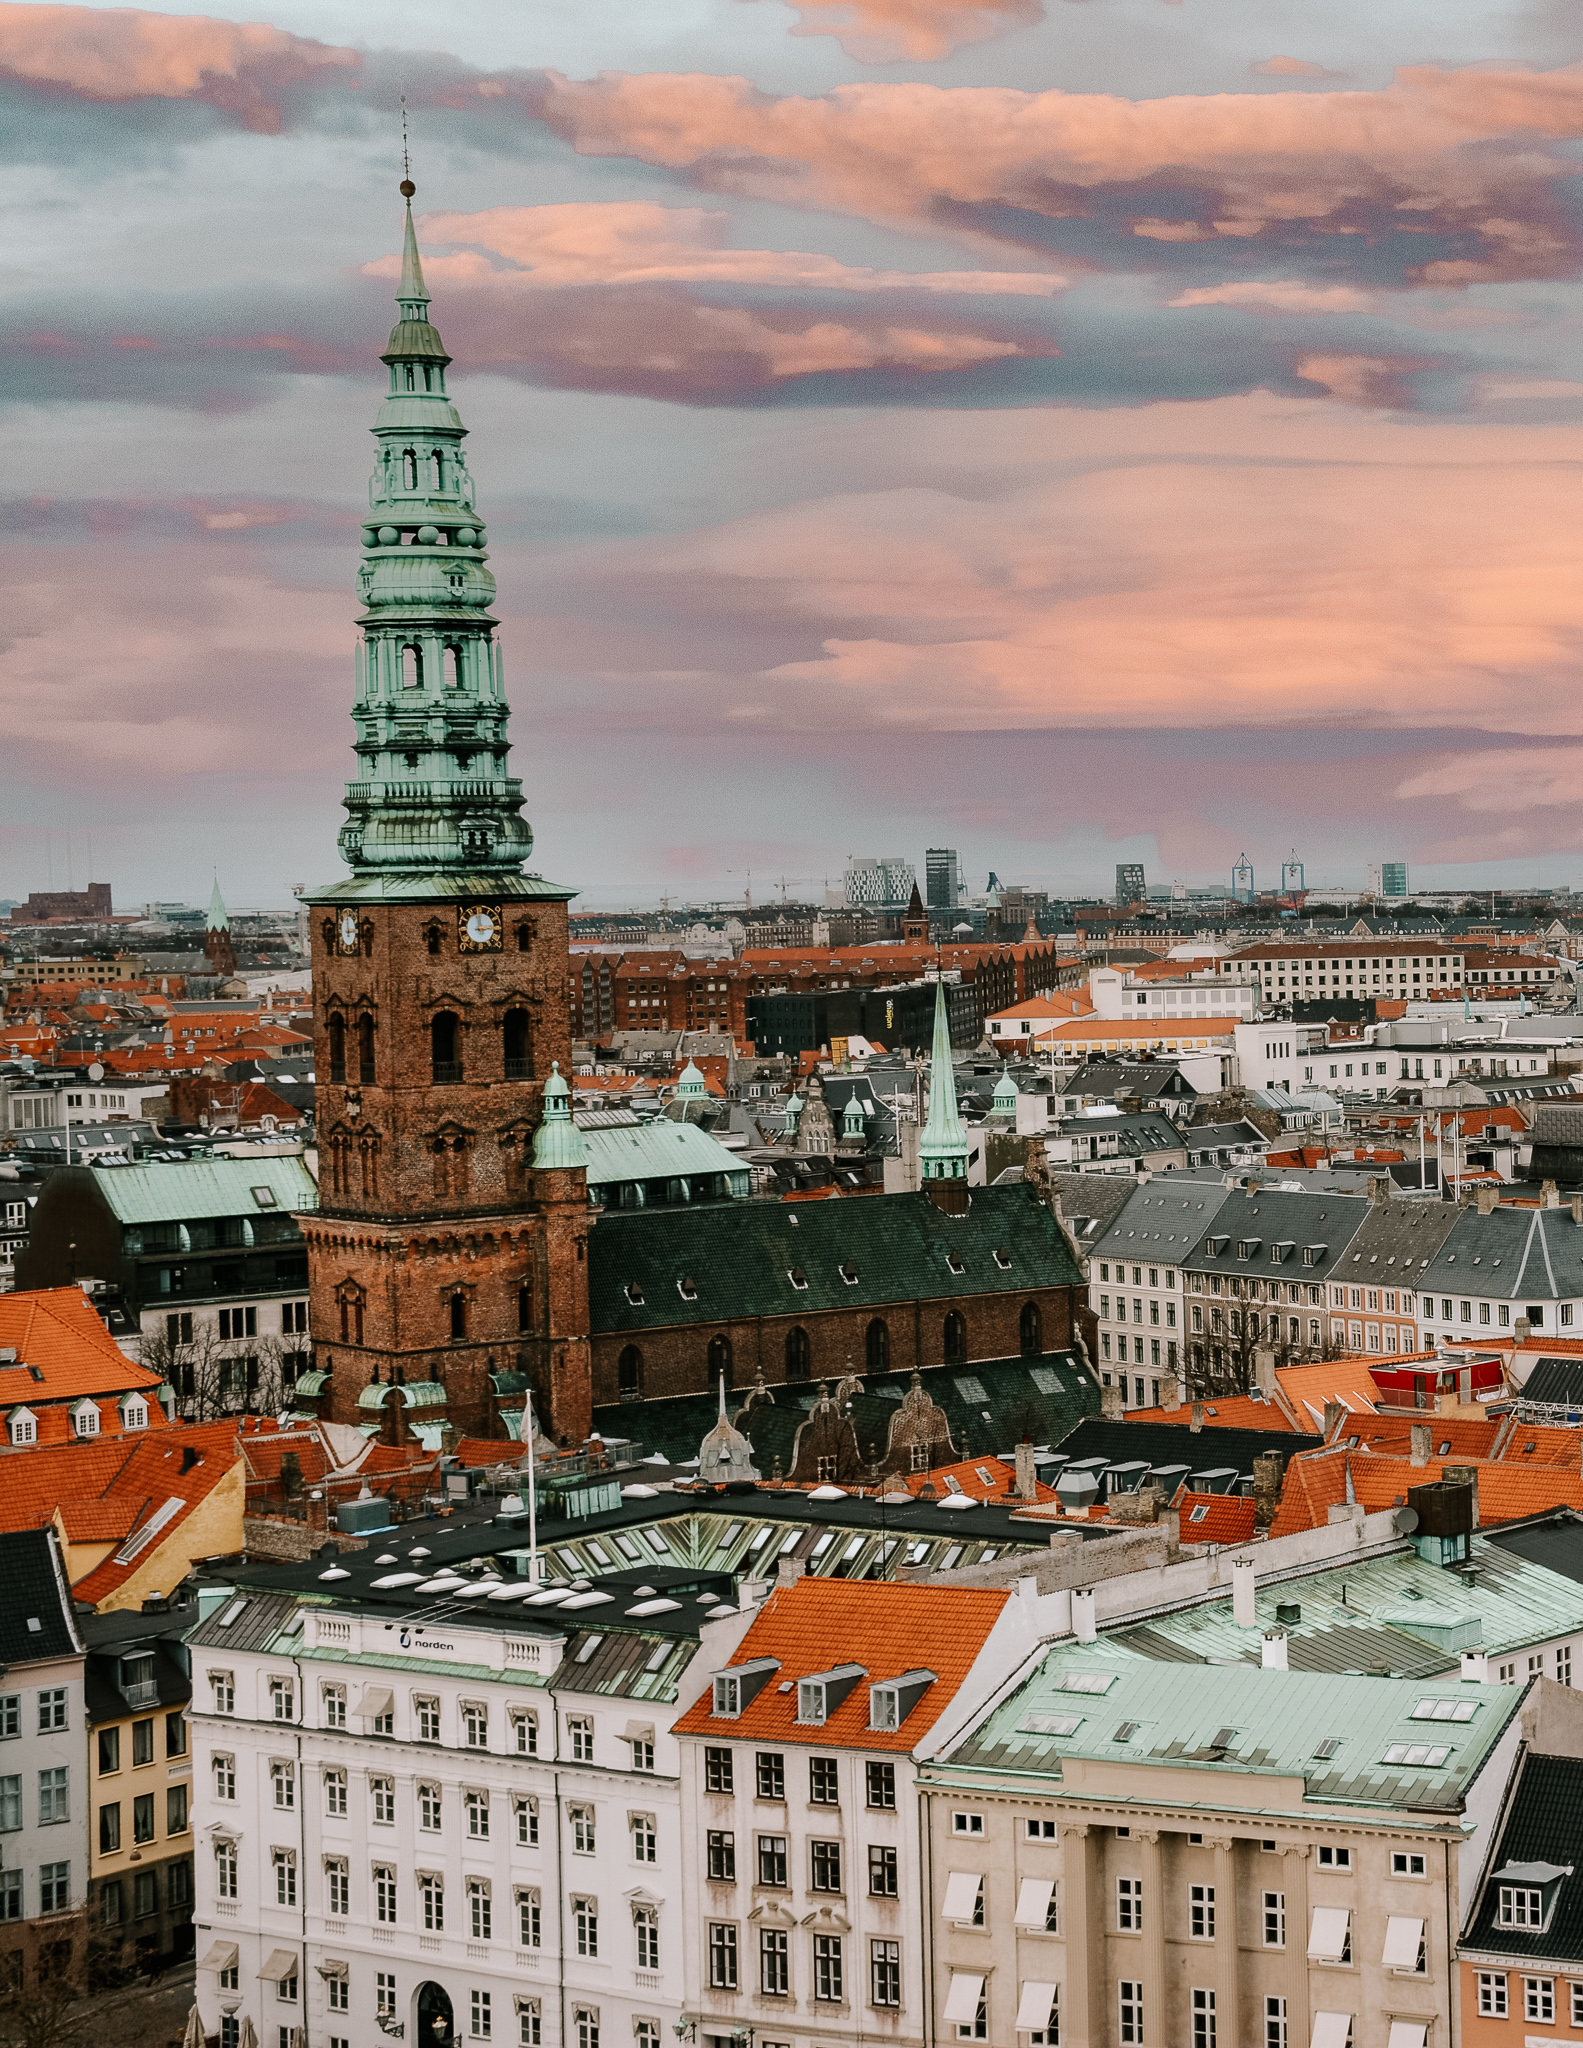 A view of Copenhagen from above, with a view of the church in the foreground and many roofs below, during sunset.